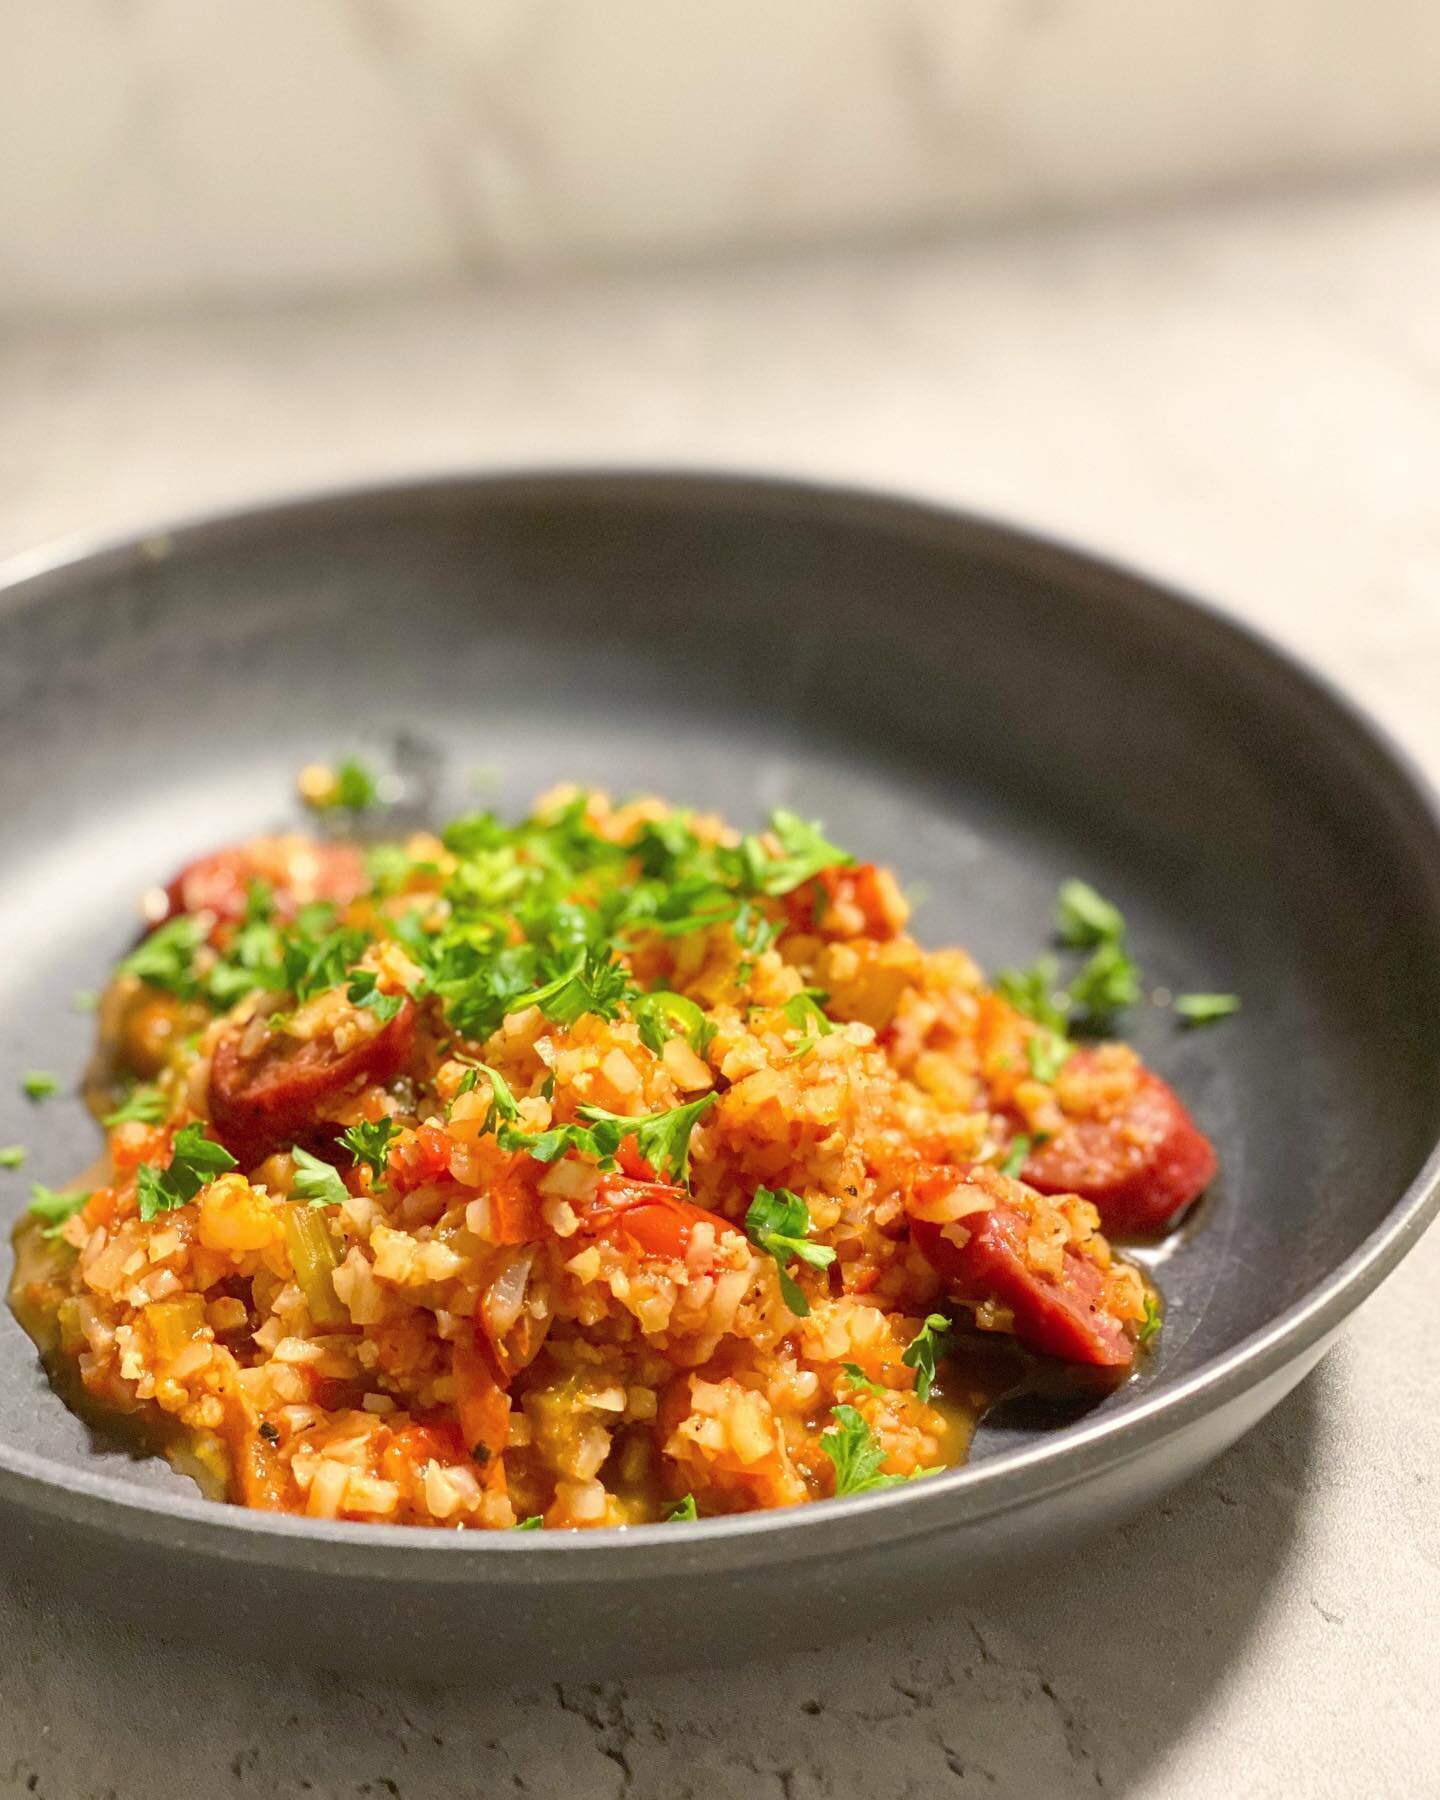 WHOLE30/PALEO JAMBALAYA ✨ So much flavor and the perfect weeknight meal. This is made with cauliflower rice, making it low carb too! Recipe below ⬇️⬇️⬇️
&bull;
1 pound compliant andouille sausage
1 1/2 tablespoons olive oil or avocado oil
4 cloves ga